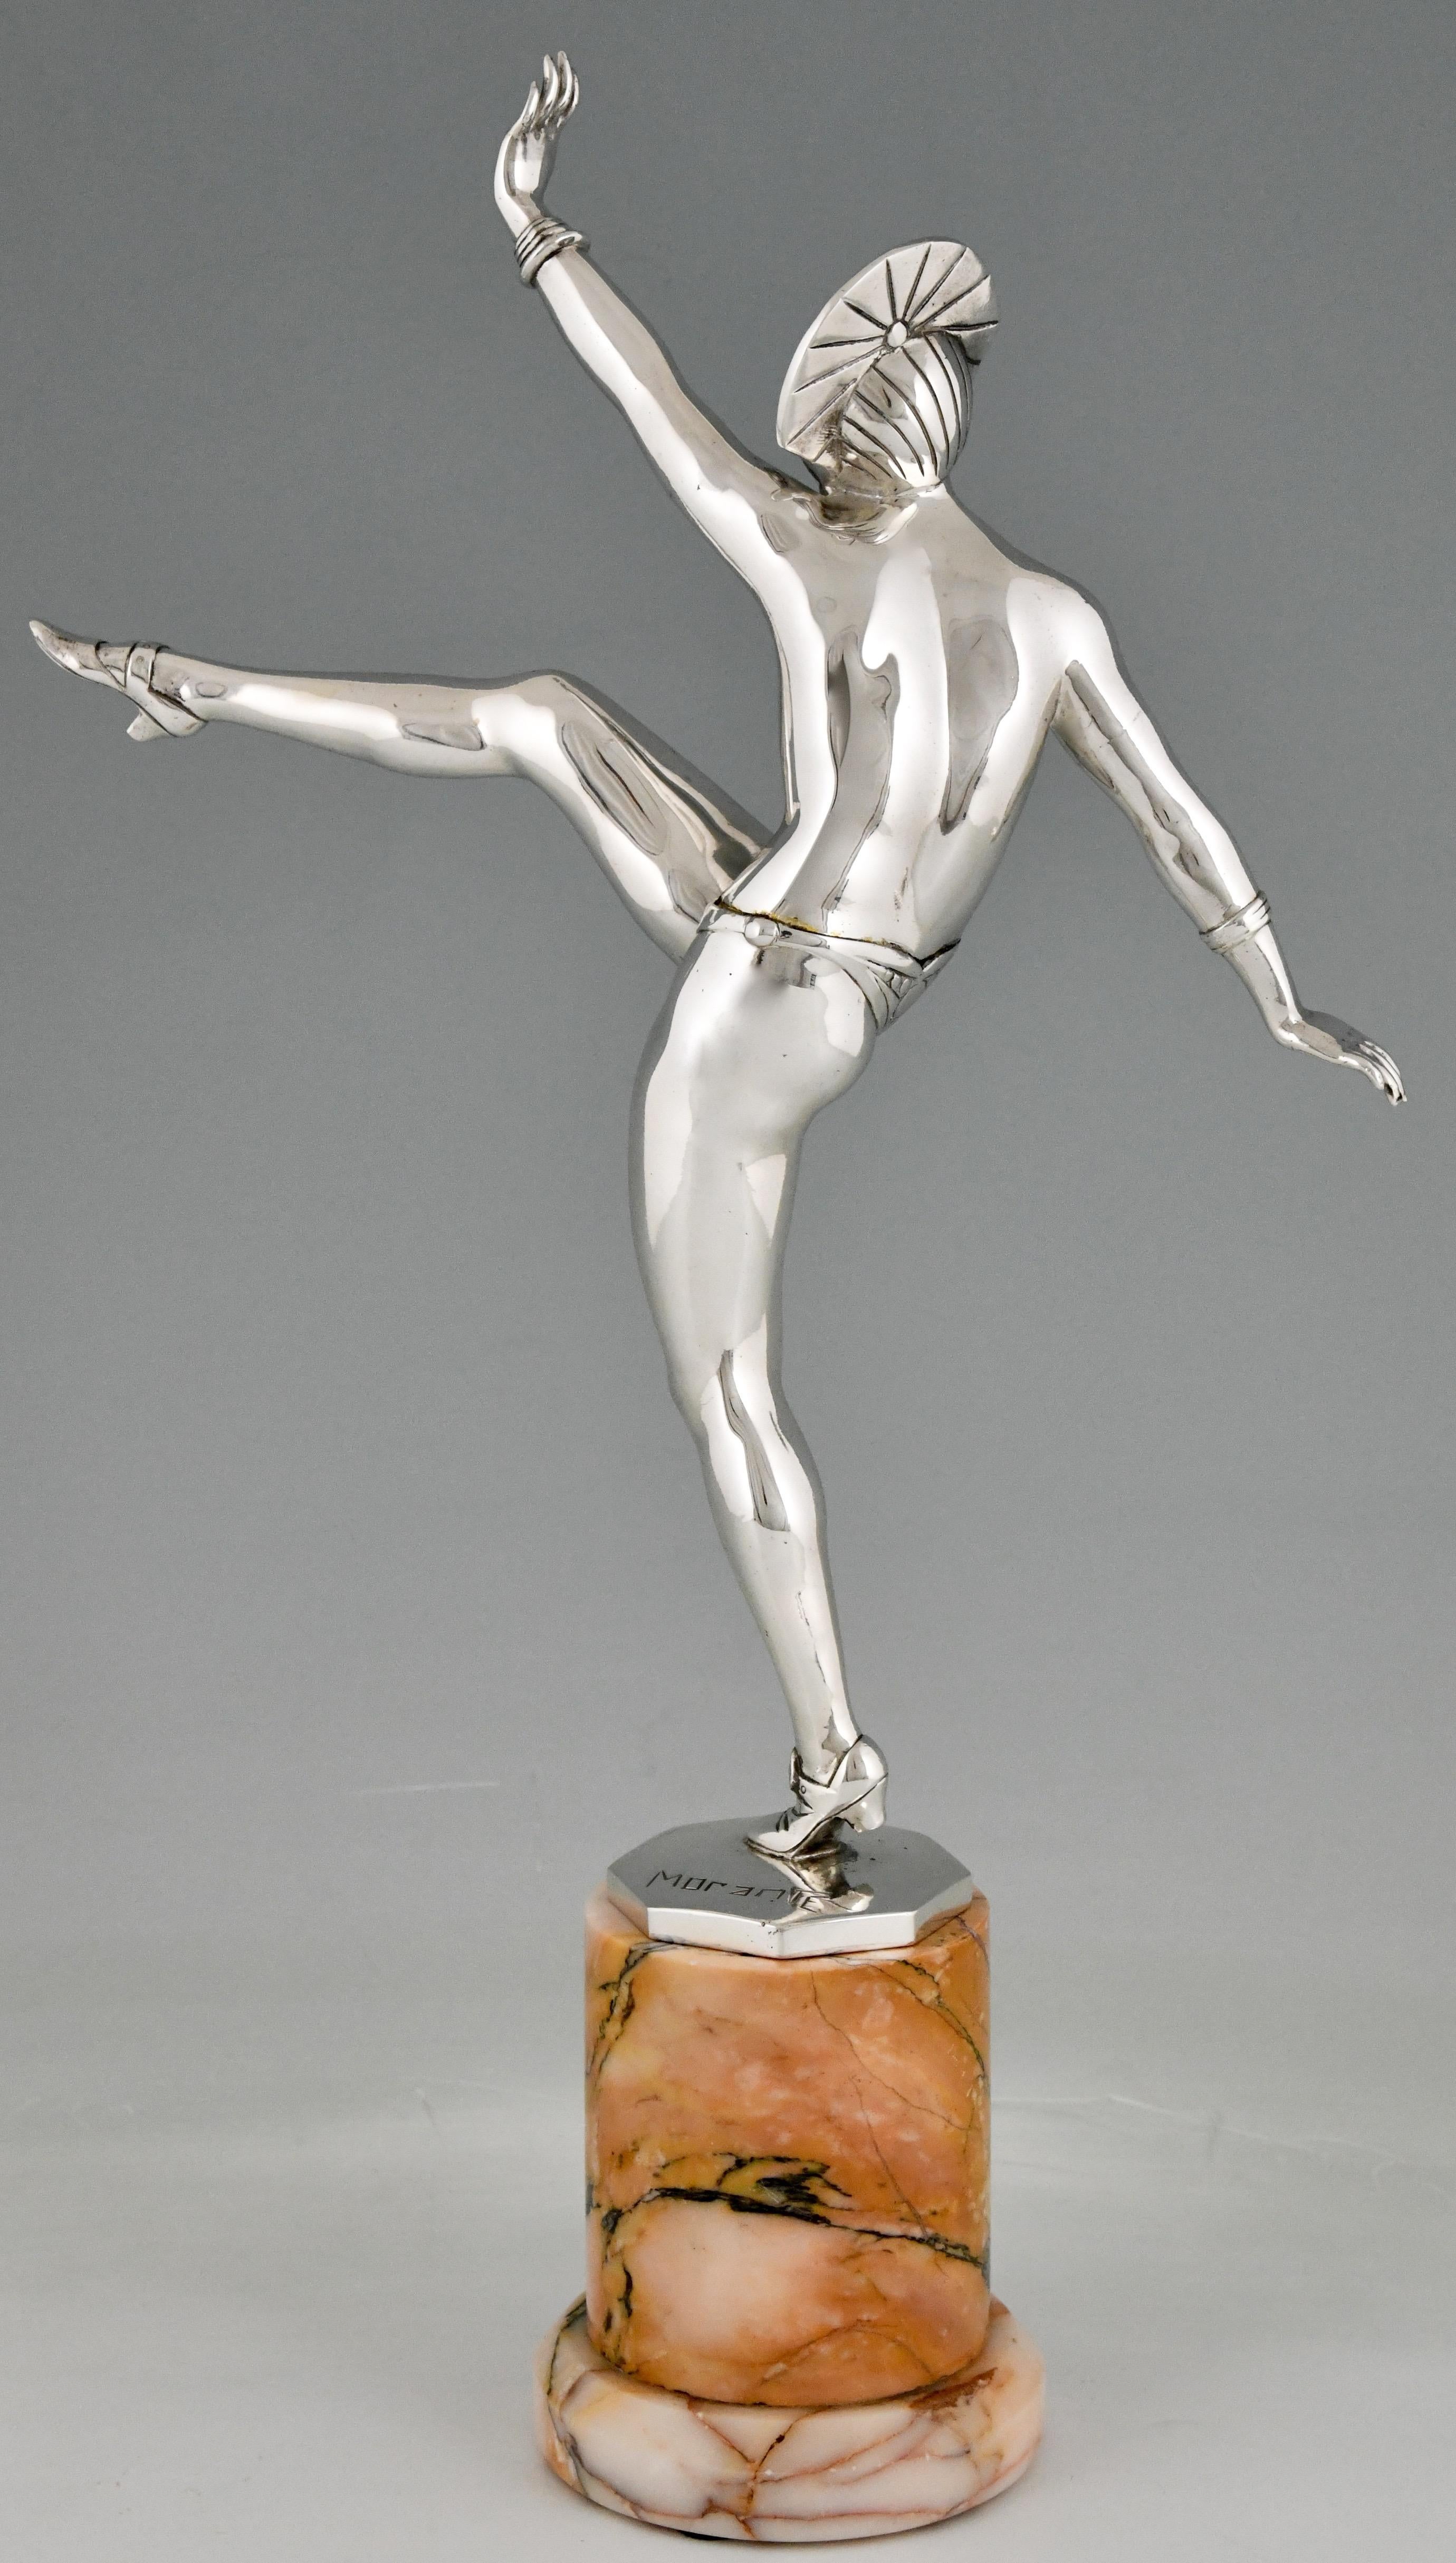 Early 20th Century Art Deco Silvered Bronze Sculpture of a Nude Dancer by Morante France 1925